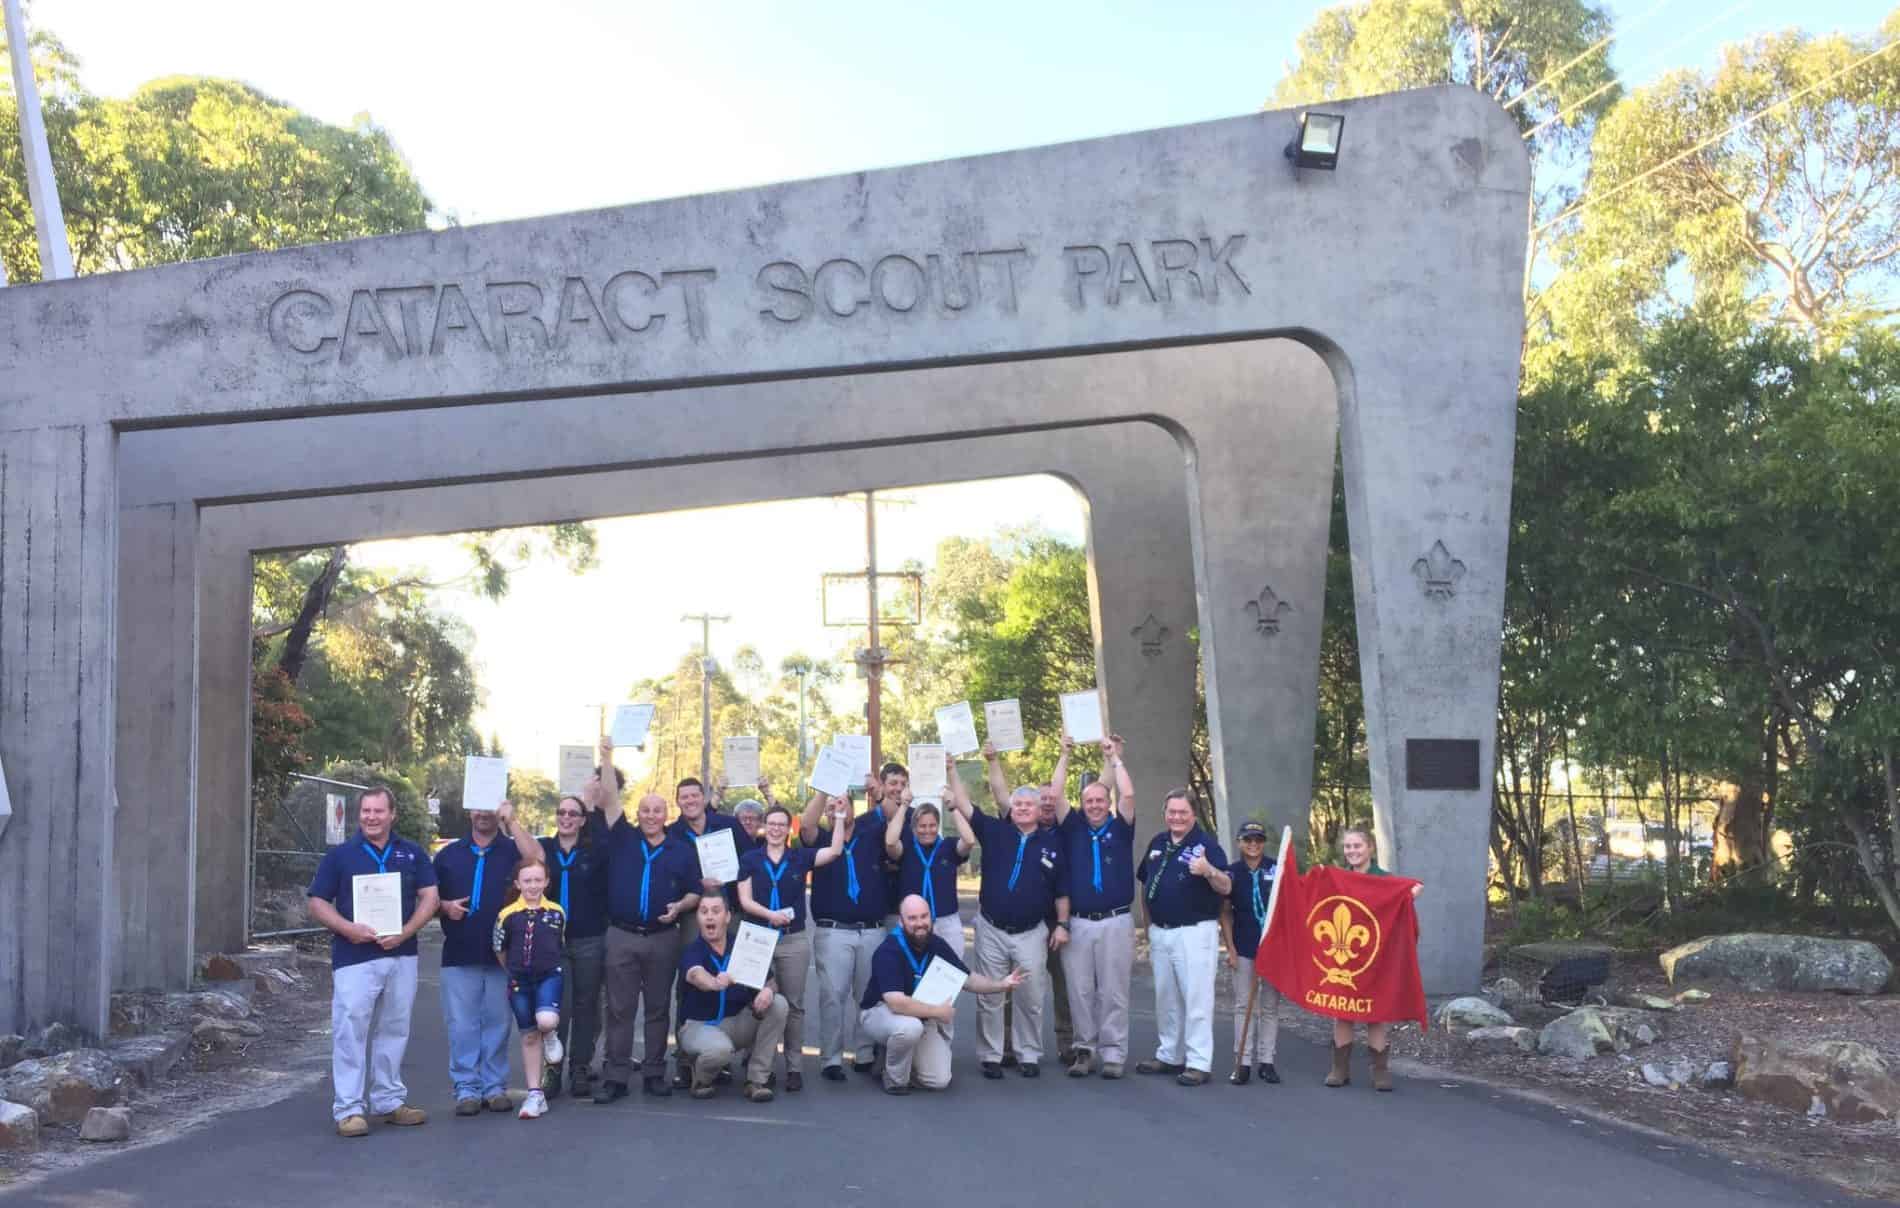 Cataract Scout Park entrance with Scouts holding papers infront